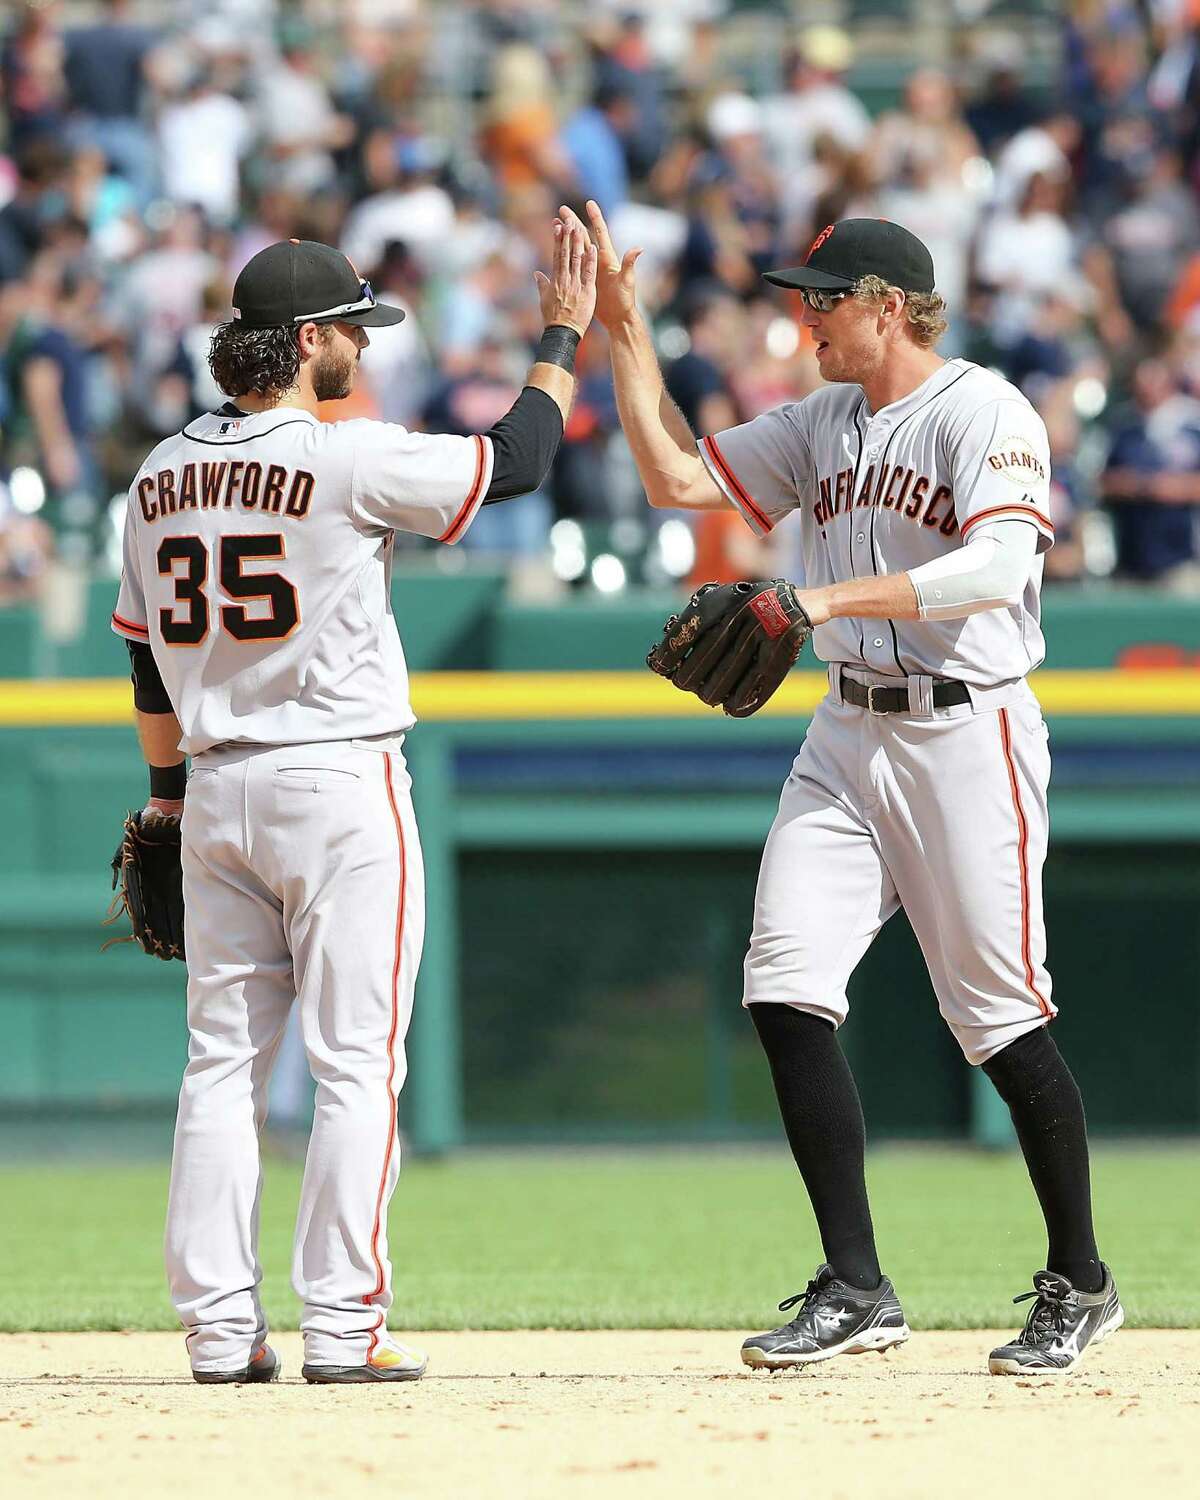 DETROIT, MI - SEPTEMBER 06: Brandon Crawford #35 and Hunter Pence #8 of the San Francisco Giants celebrate a win over the Detroit Tigers at Comerica Park on September 6, 2014 in Detroit, Michigan. The Giants defeated the Tigers 5-4. (Photo by Leon Halip/Getty Images)